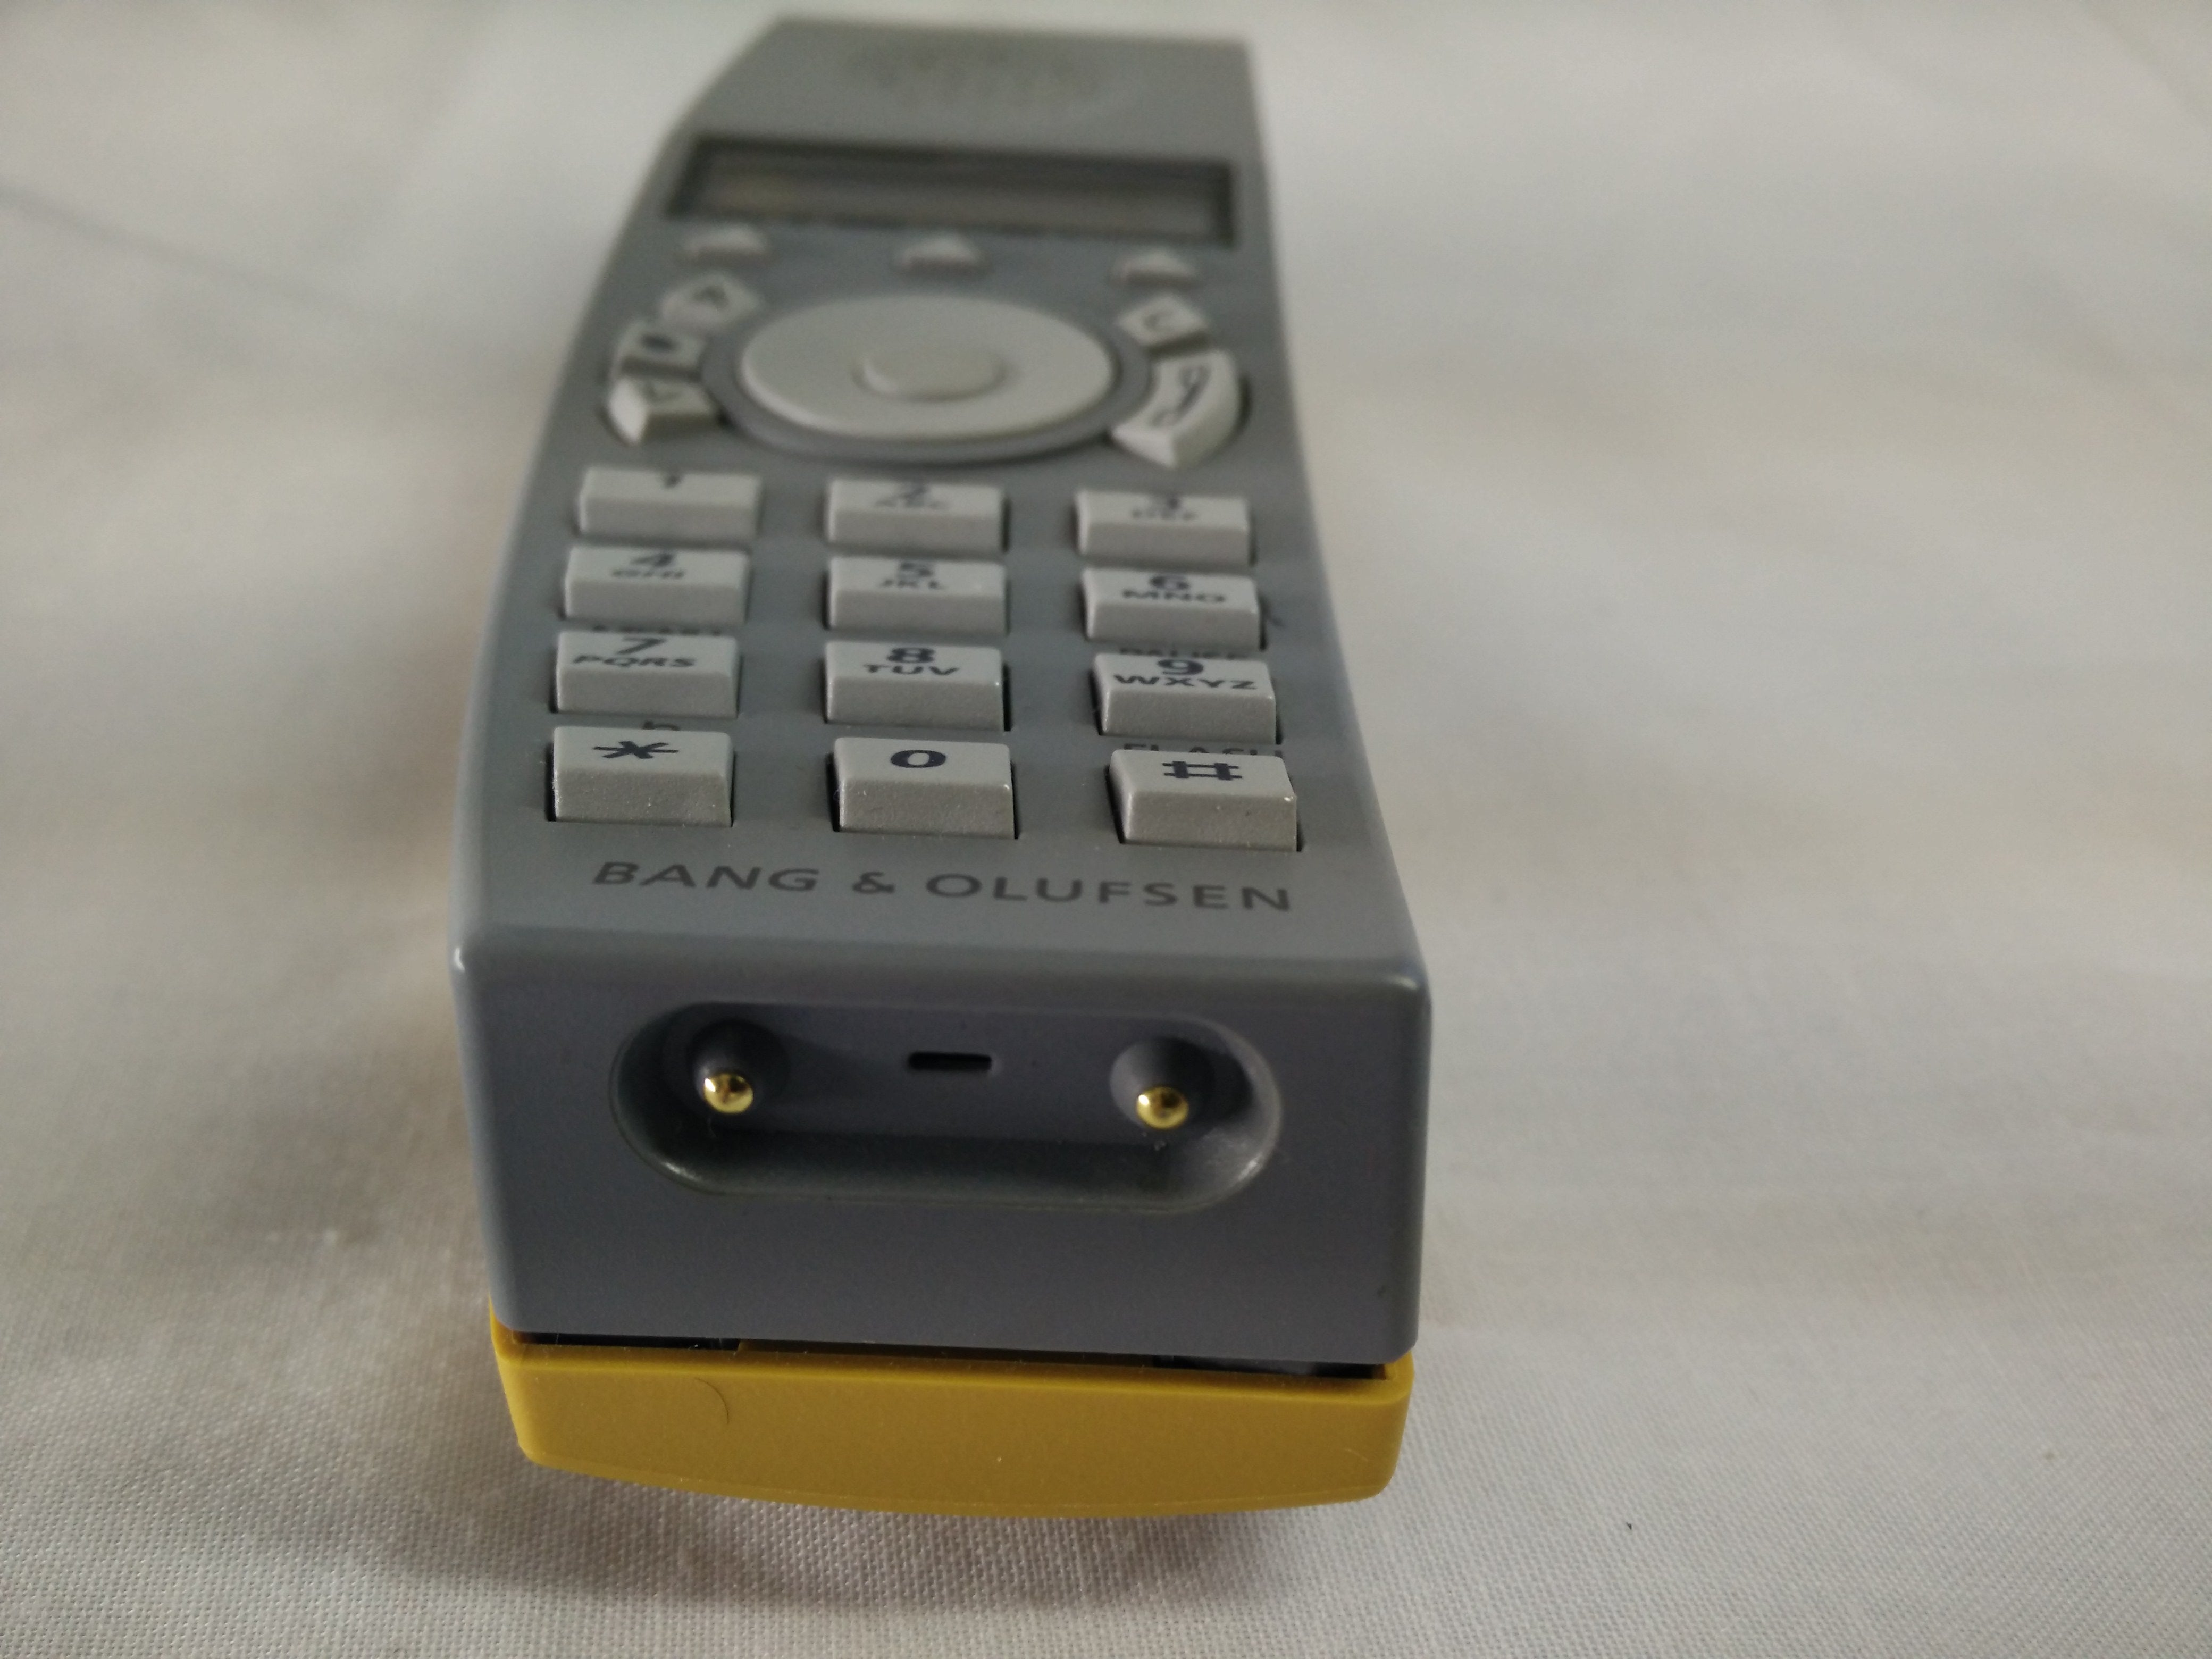 Bang & Olufsen Beocom 6000 Phone with New Yellow Covers